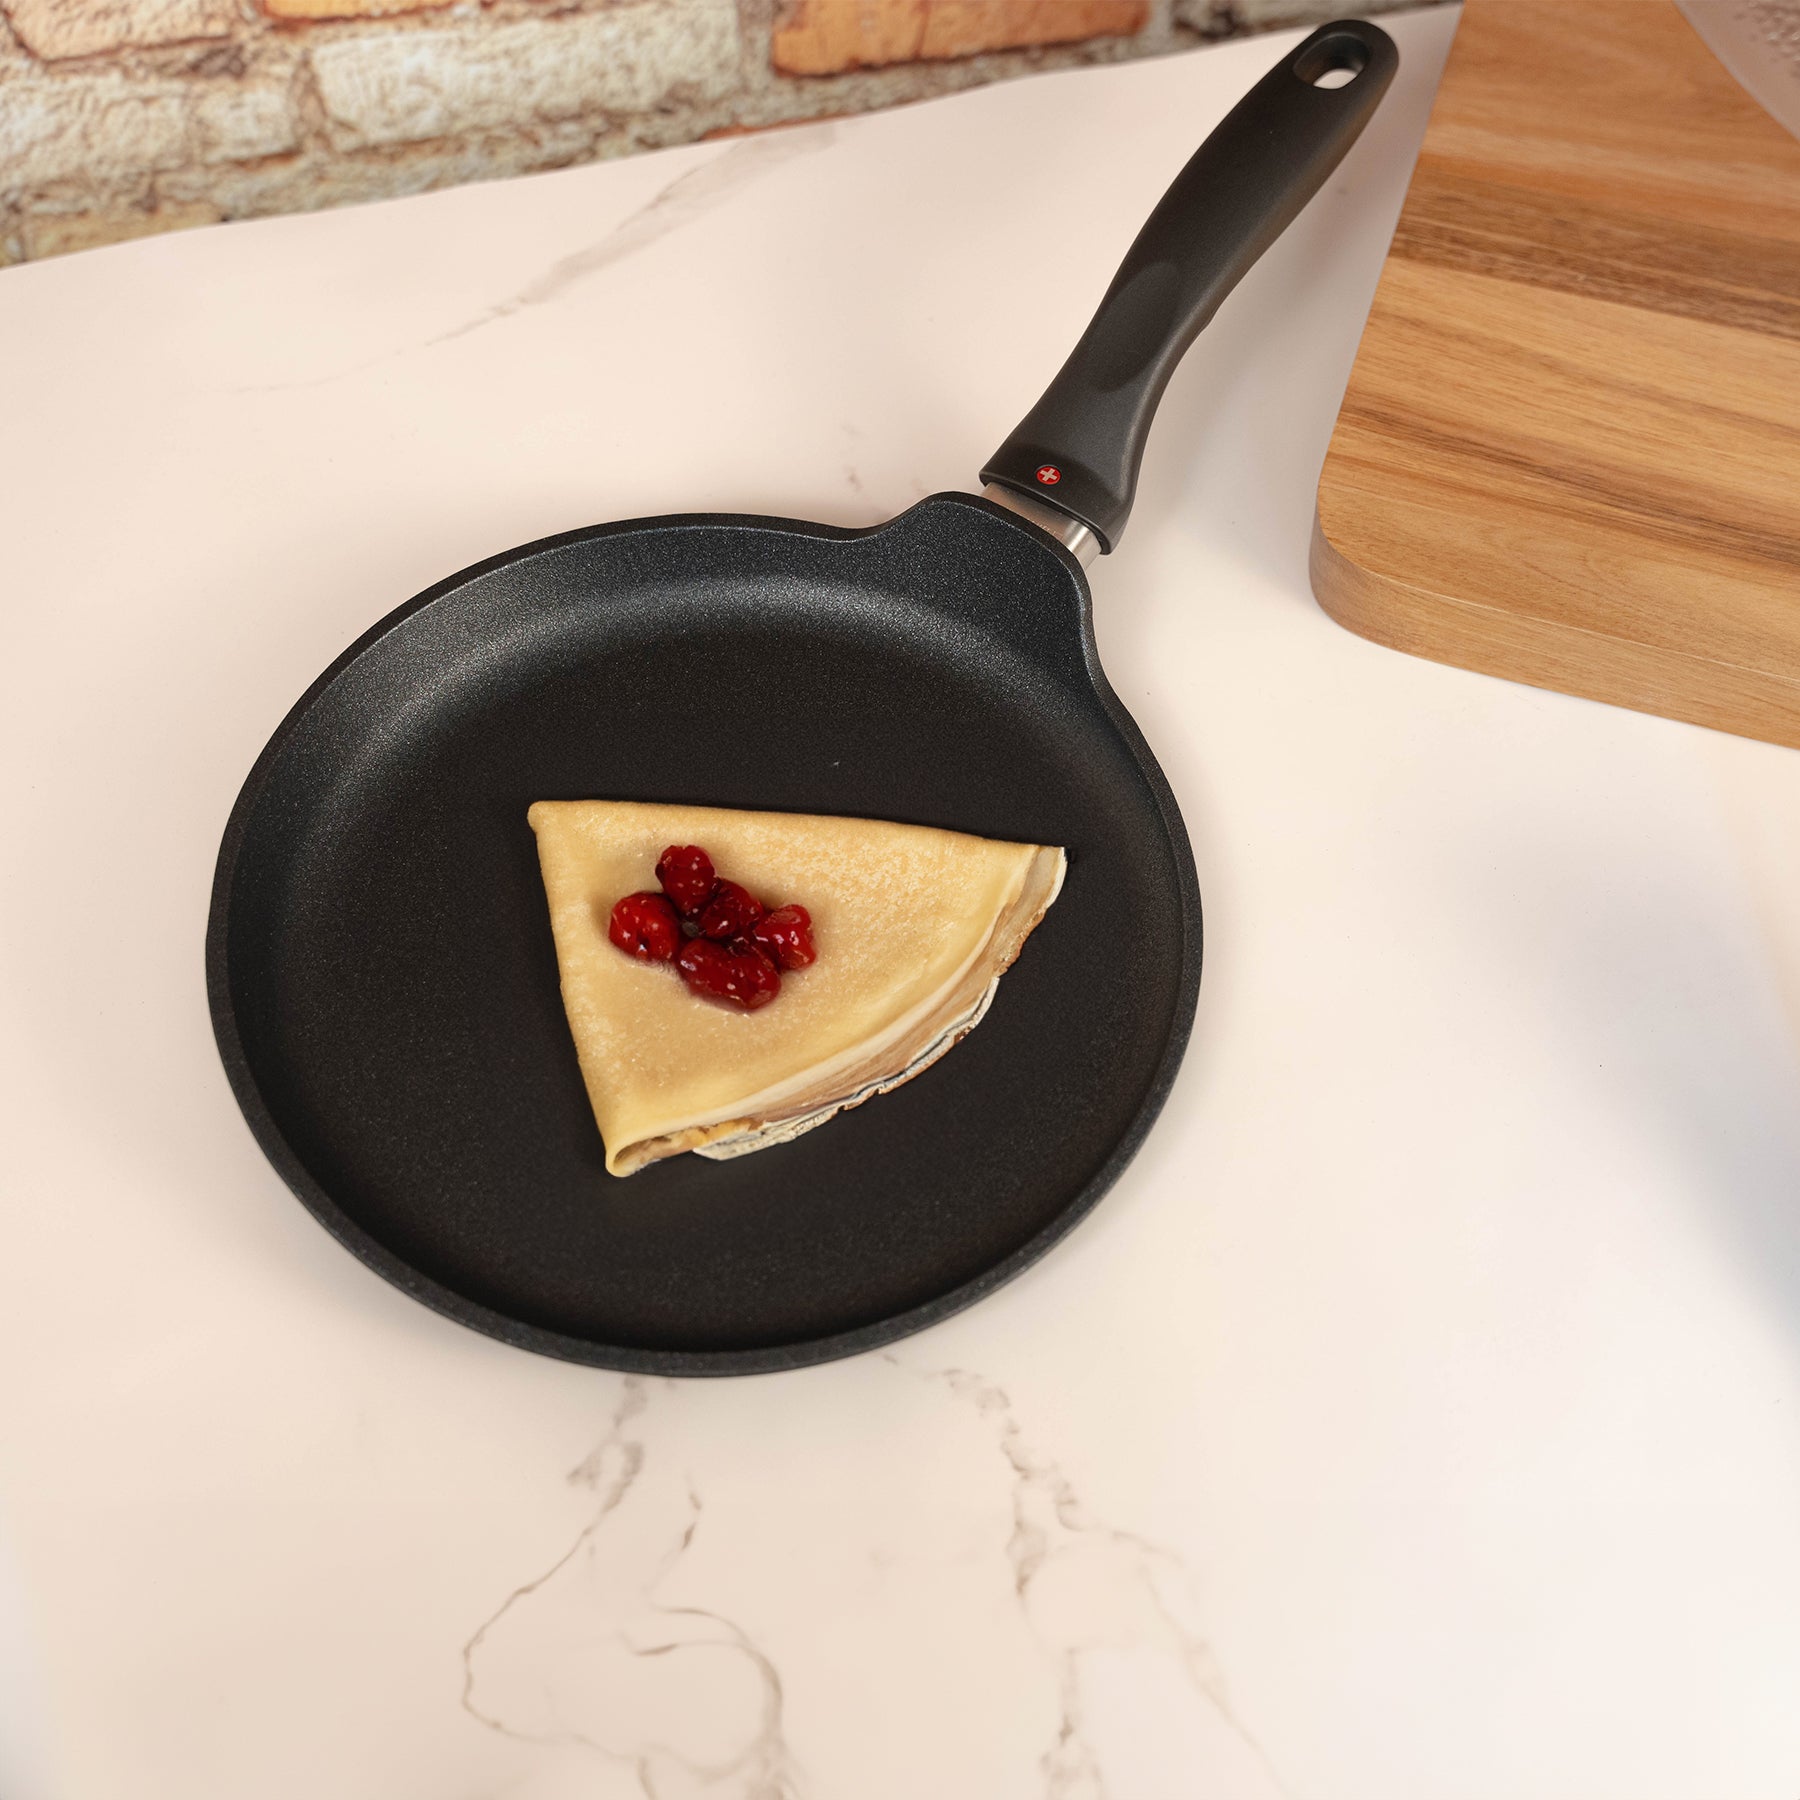 XD Nonstick Crepe Pan - Induction in use with food on surface